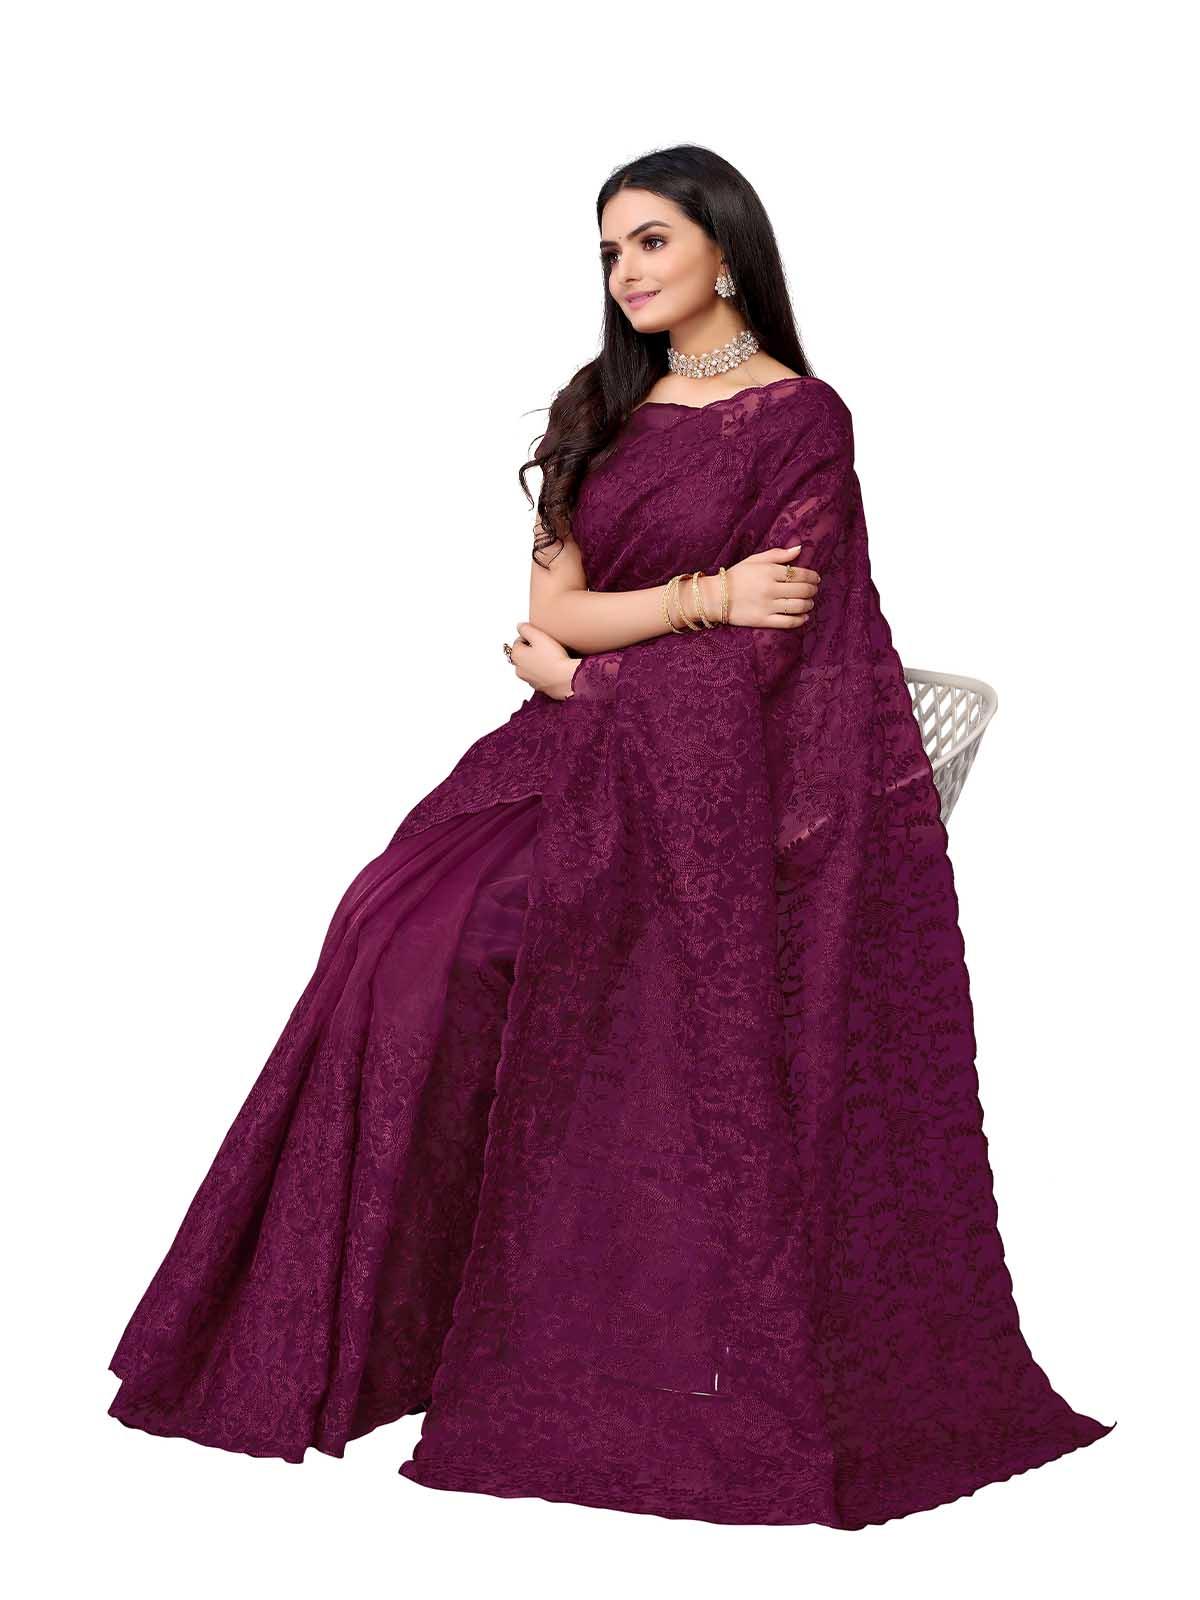 Women's Violet Organza Embroidered Saree With Blouse - Odette